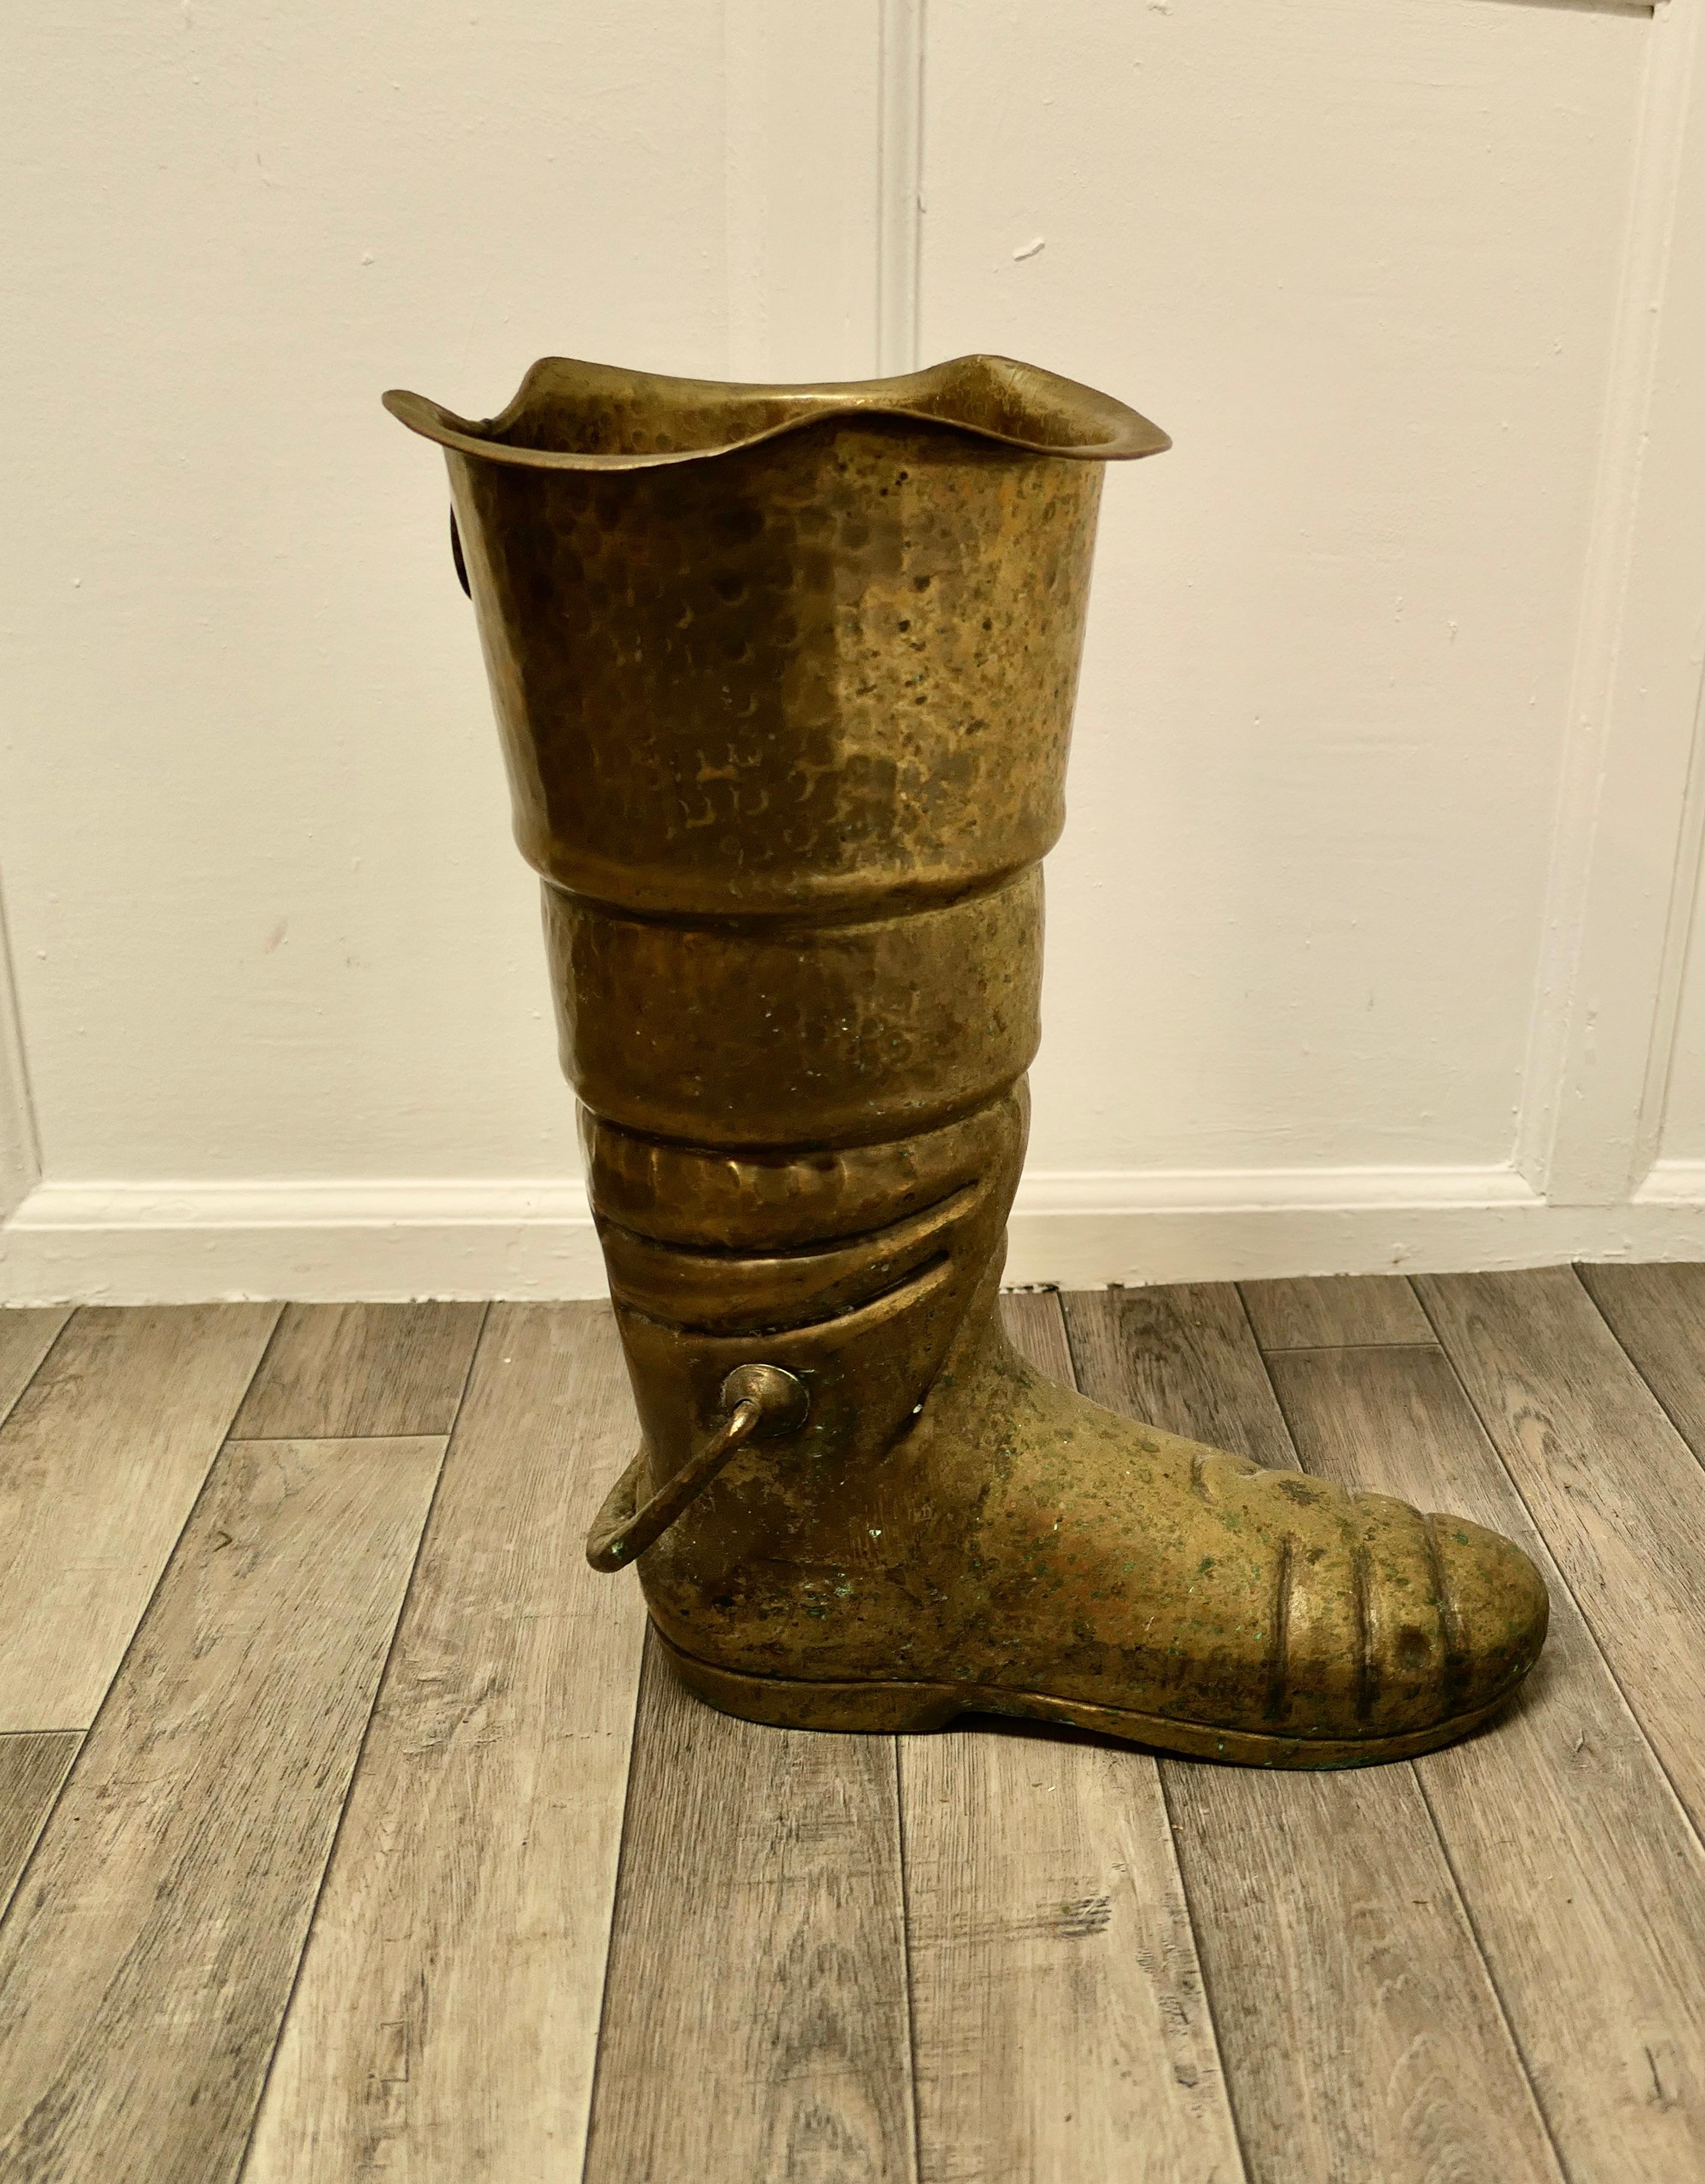 A very unusual stick stand a brass deep sea diver’s boot.

This is a very unusual slightly quirky stick stand, the boot is made in hand beaten brass and will hold many sticks or umbrellas. 
The stand is in good used condition, it is 24” high and